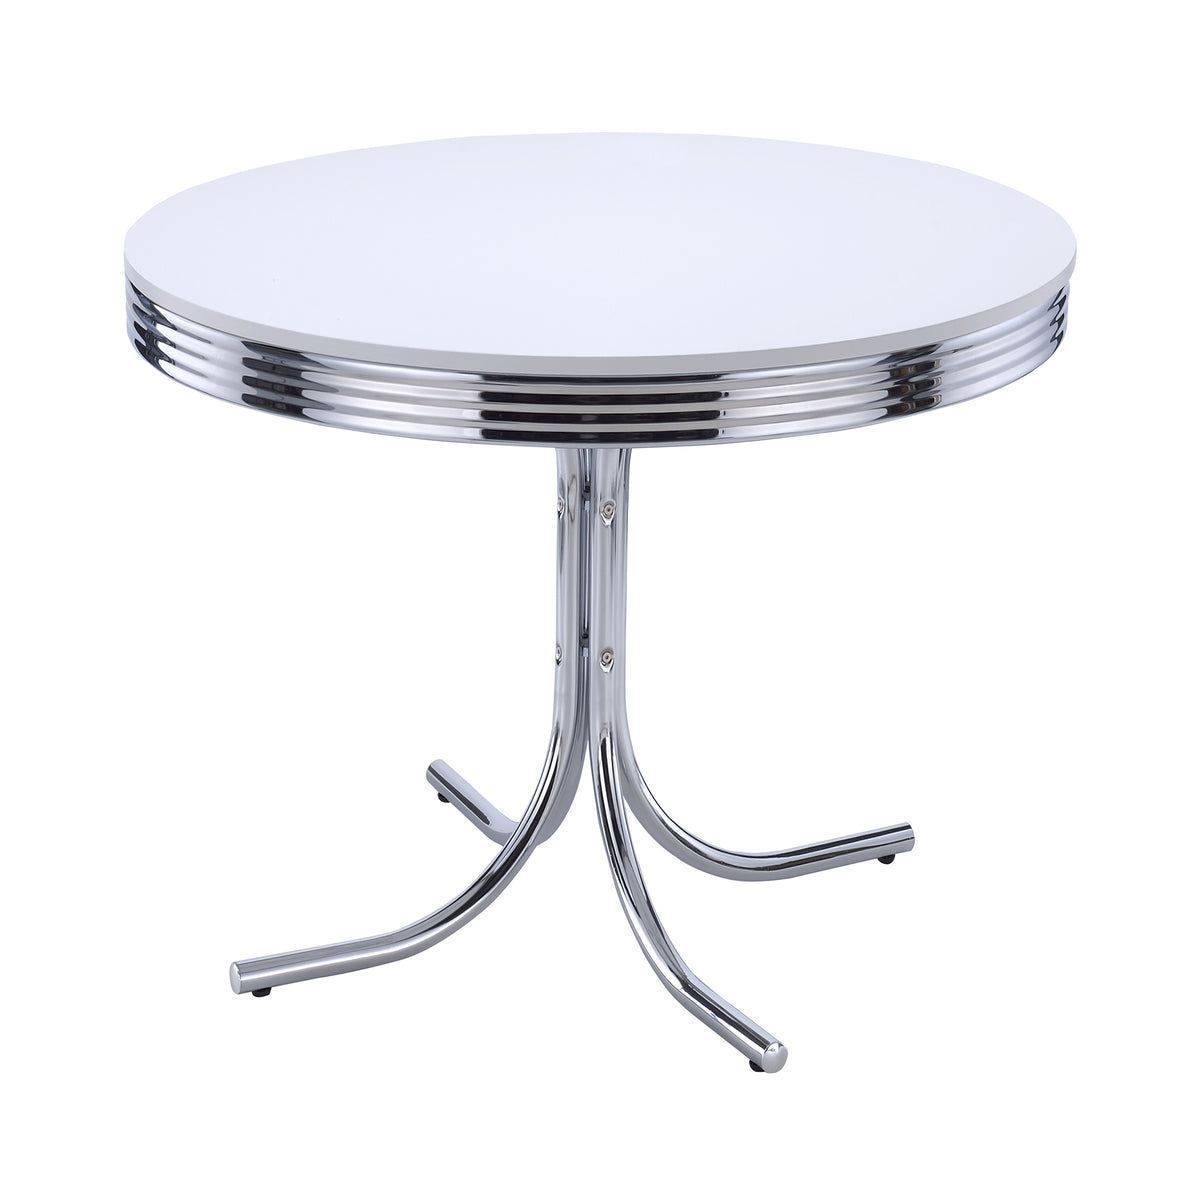 Retro Round Dining Table Glossy White and Chrome  Las Vegas Furniture Stores